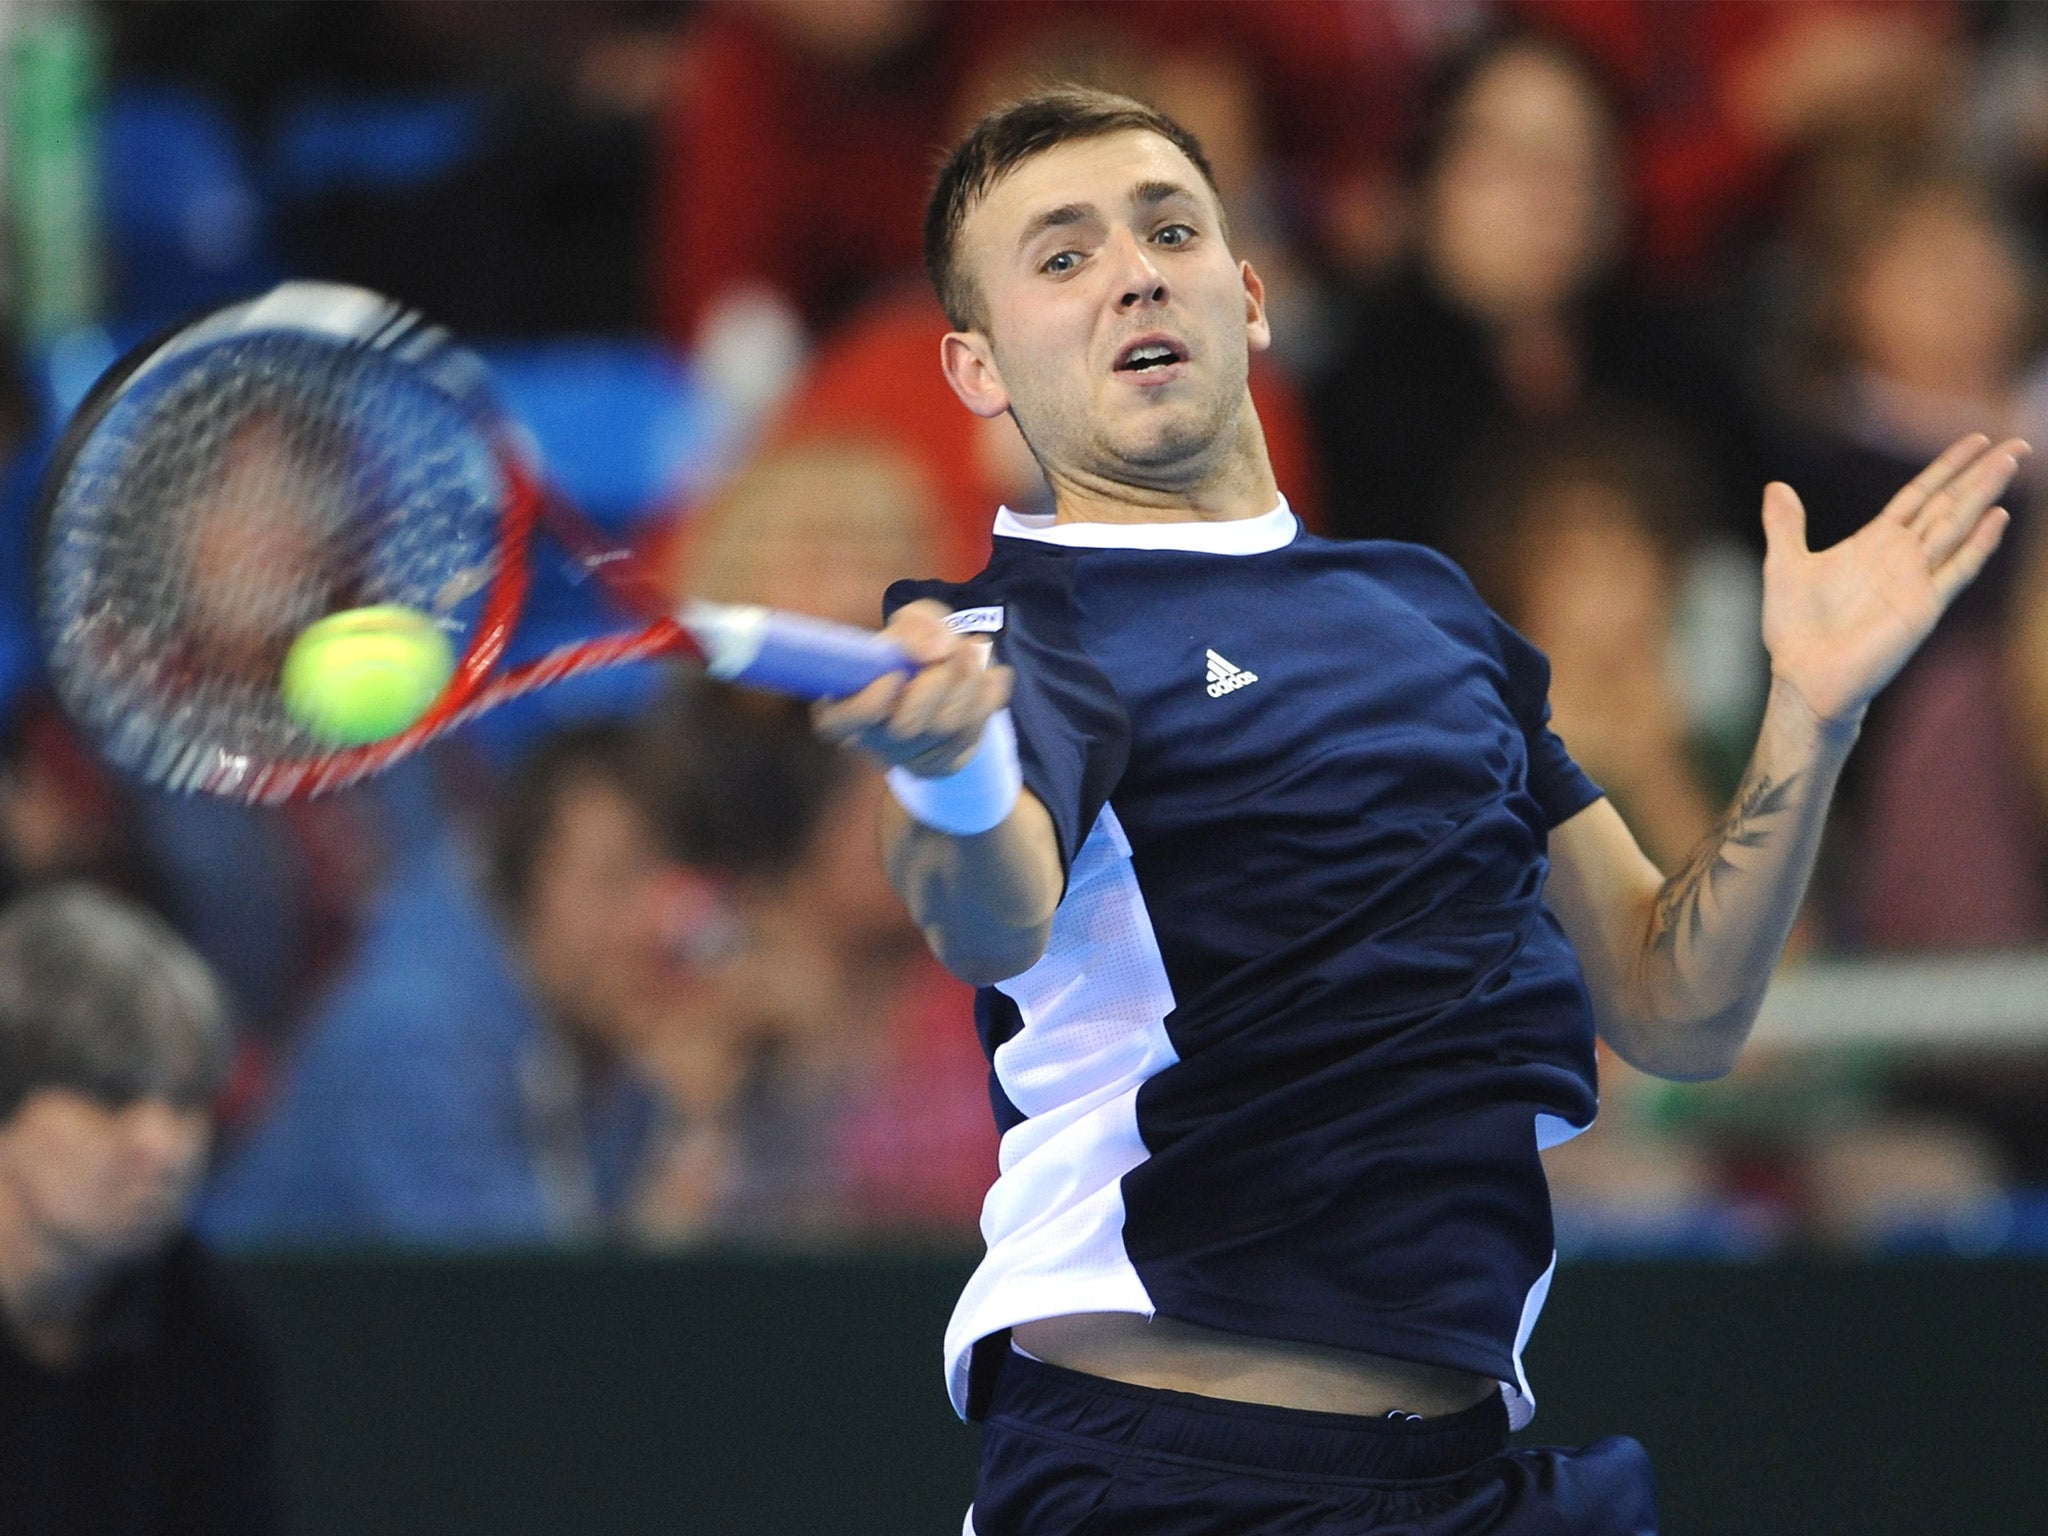 Dan Evans has not competed outside Britain or Ireland in over a year